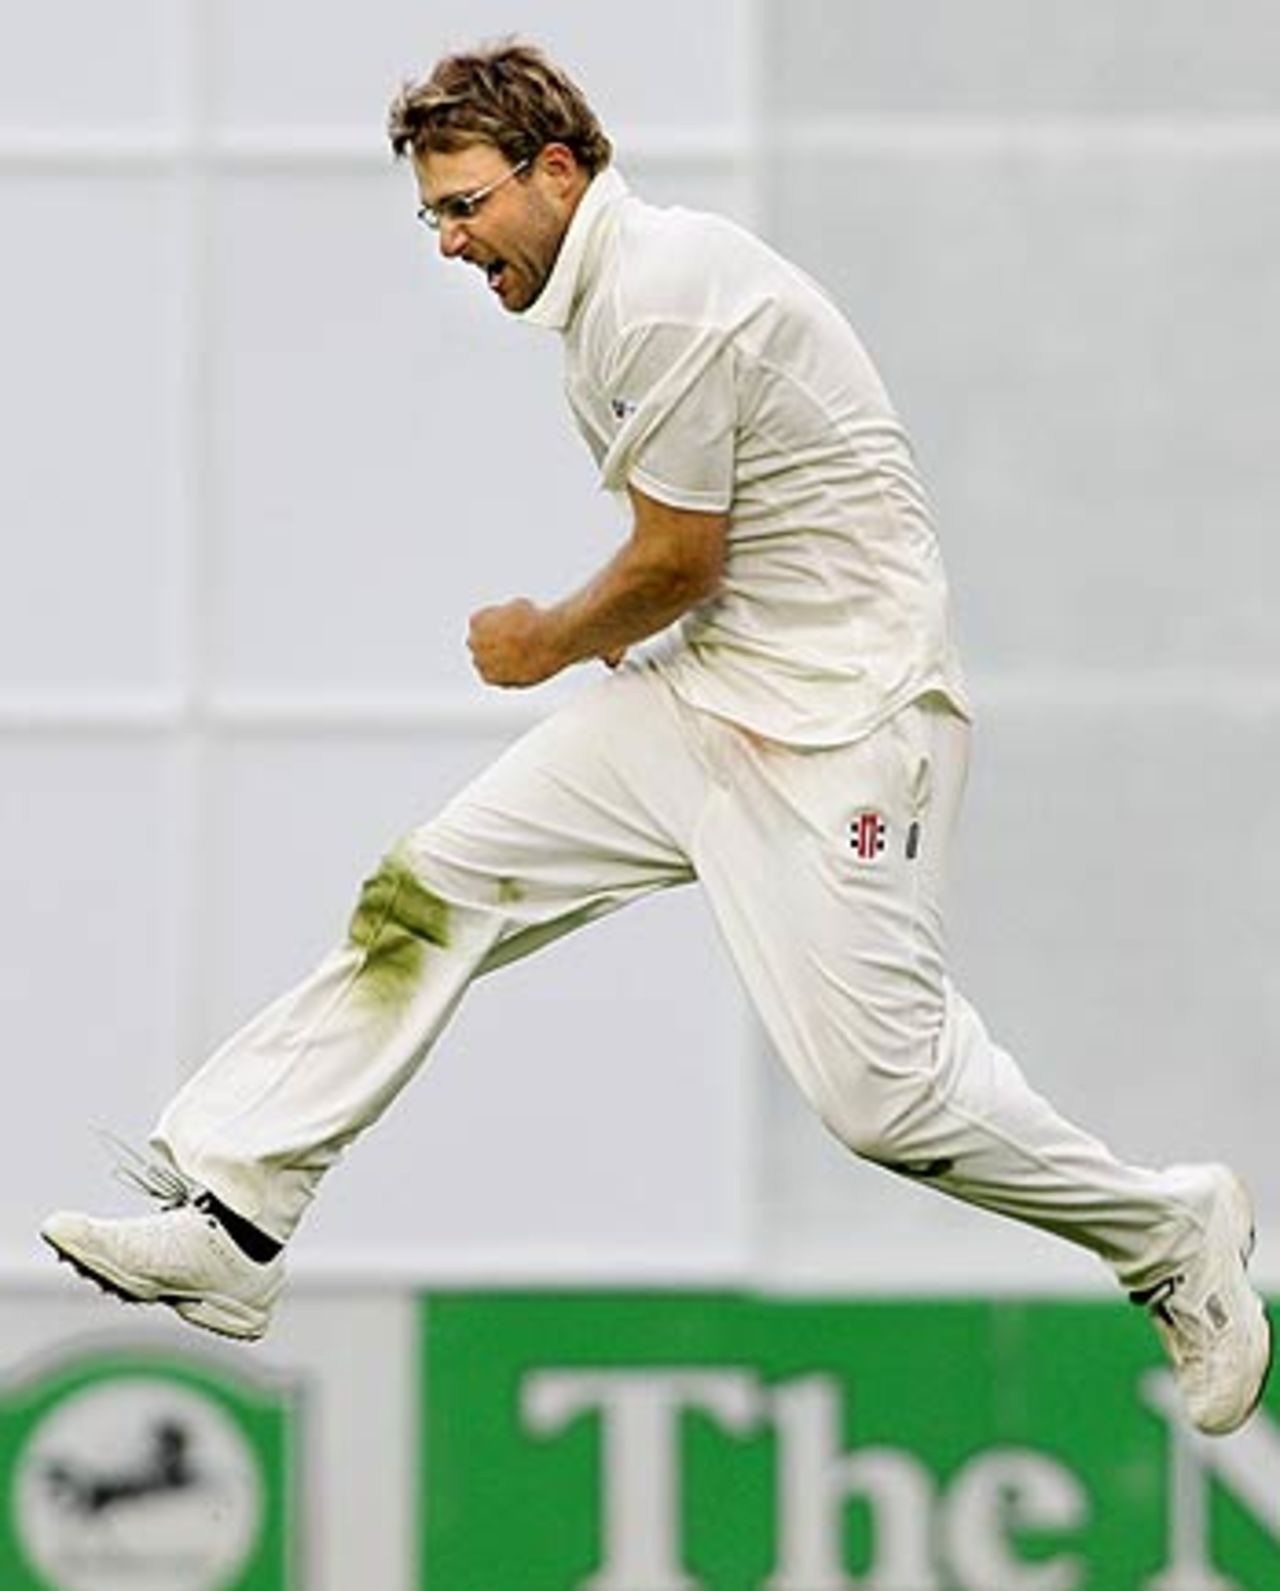 Daniel Vettori celebrates the wicket of Denesh Ramdin as stumps approached, New Zealand v West Indies, 1st Test, Auckland, 4th day, March 12, 2006